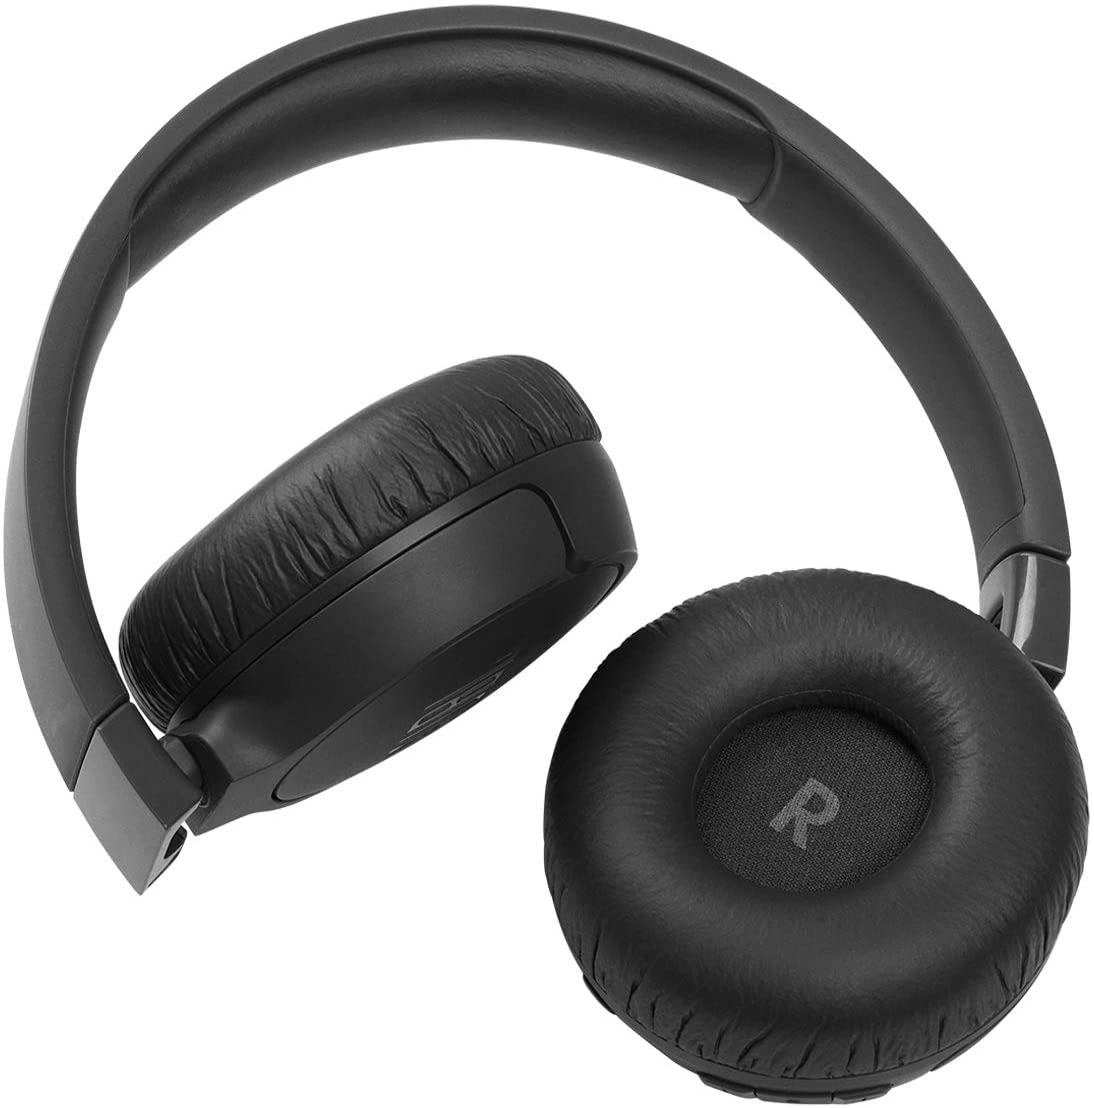 JBL Tune 660NC: Wireless On-Ear Headphones With Active Noise Cancellation